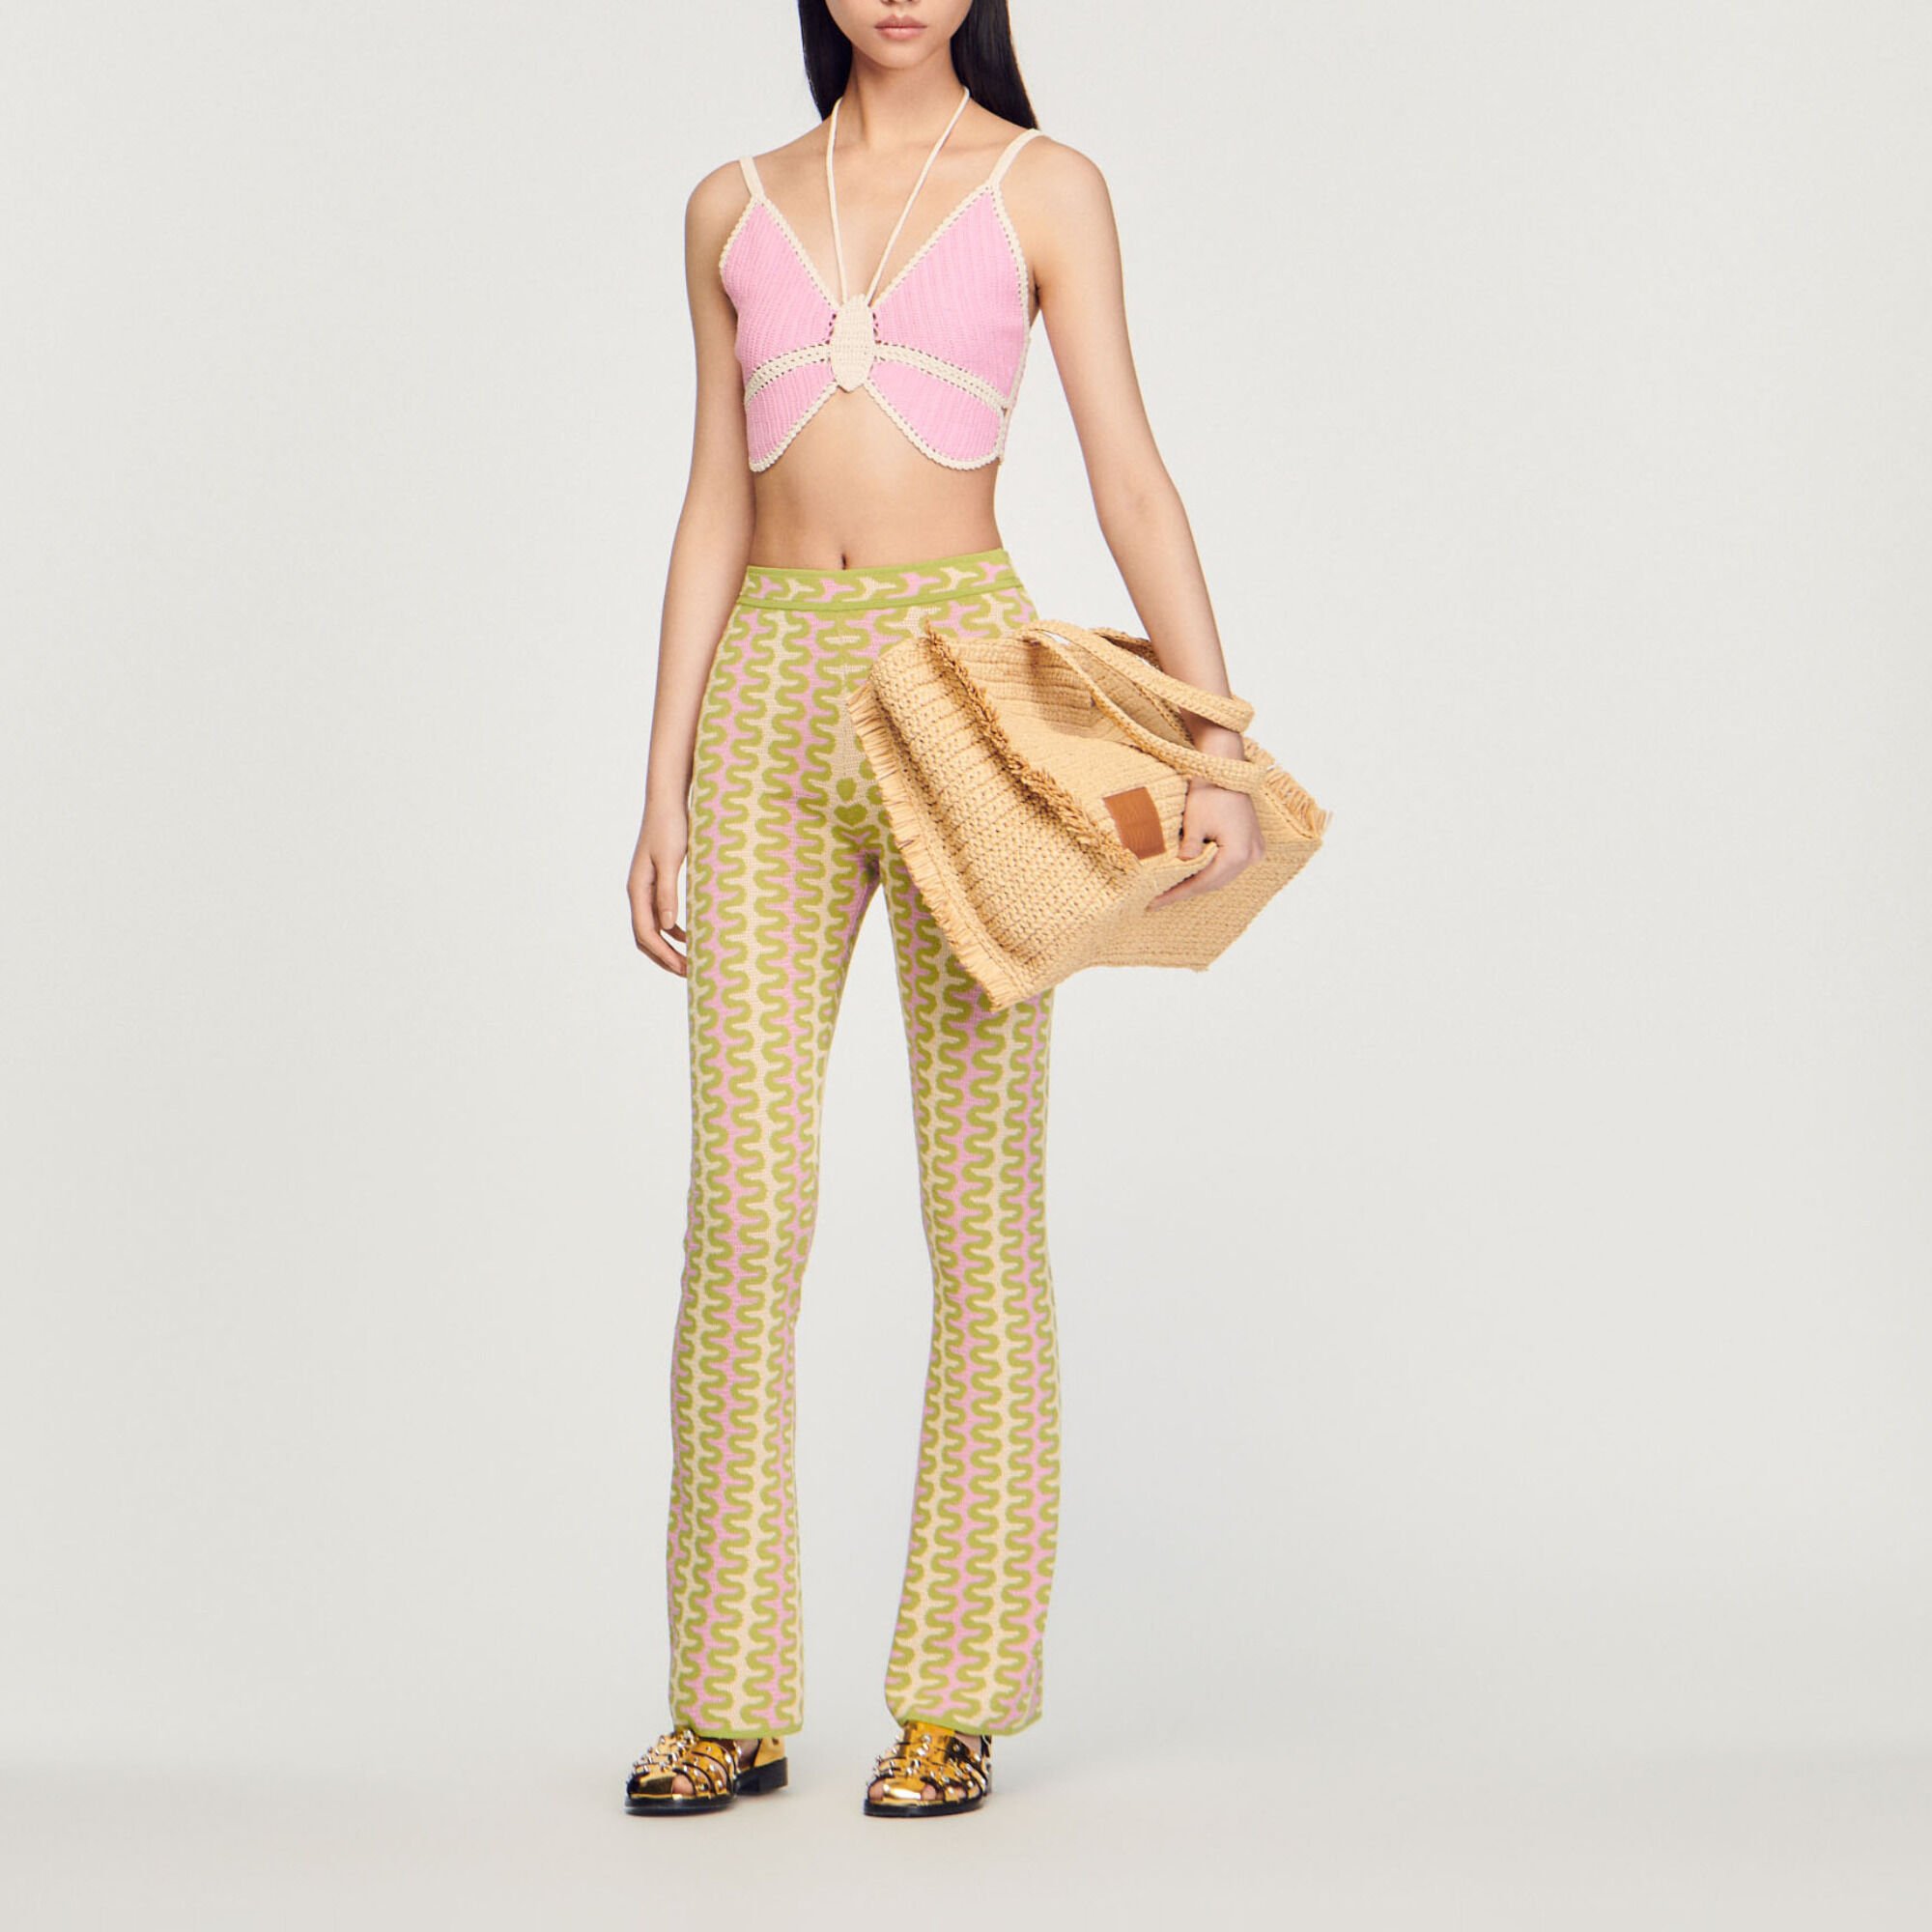 Shop for Multi Coloured  Trousers  Womens  online at Lookagain